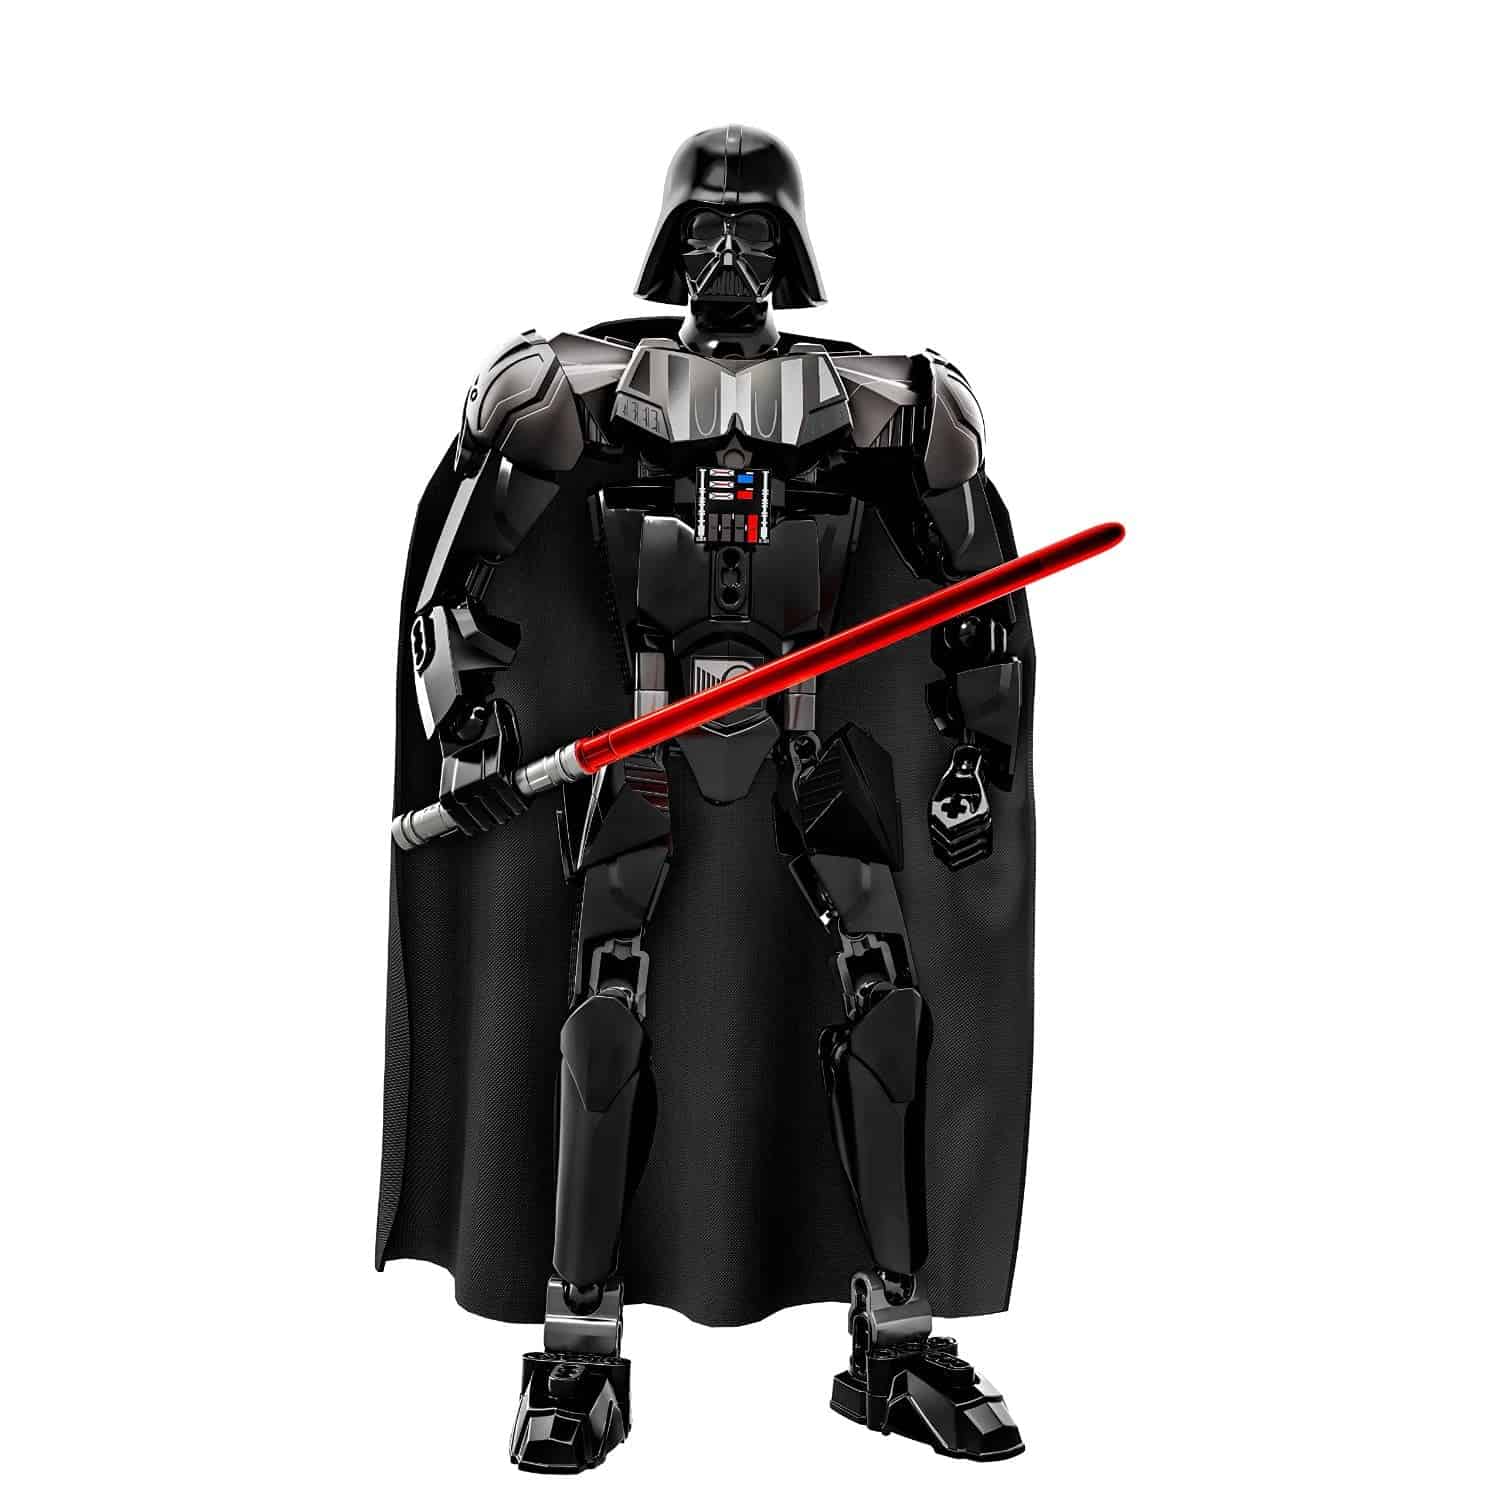 Lego Gift Ideas by Age - Toddler to Twelve Years: Star Wars Darth Vader | www.thepinningmama.com